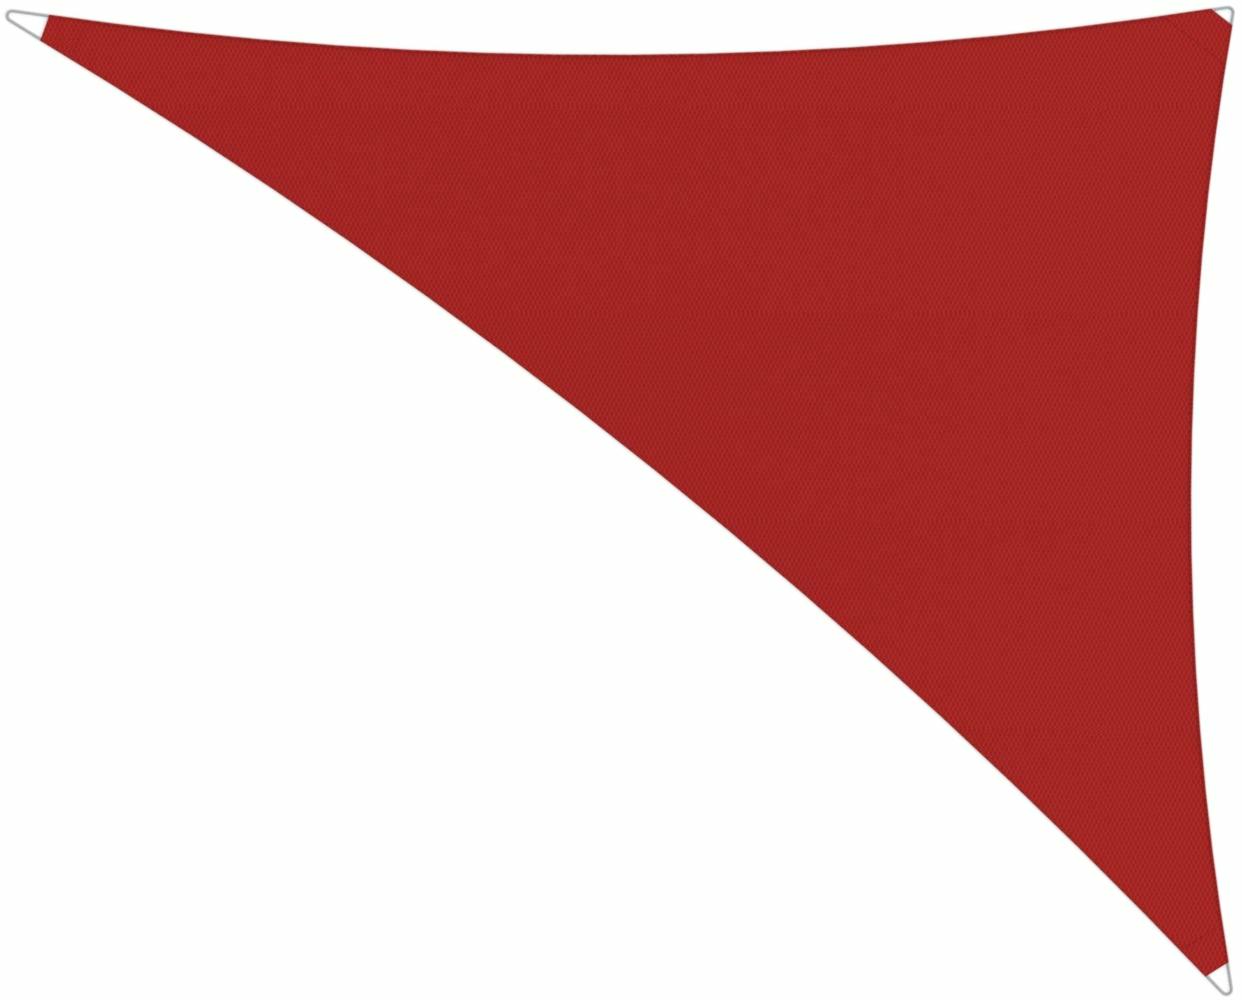 Ingenua shade sail Triangle 4 x 5 x 6,4 m, for outdoor use. Colour of the fabric shade sail Pepper.